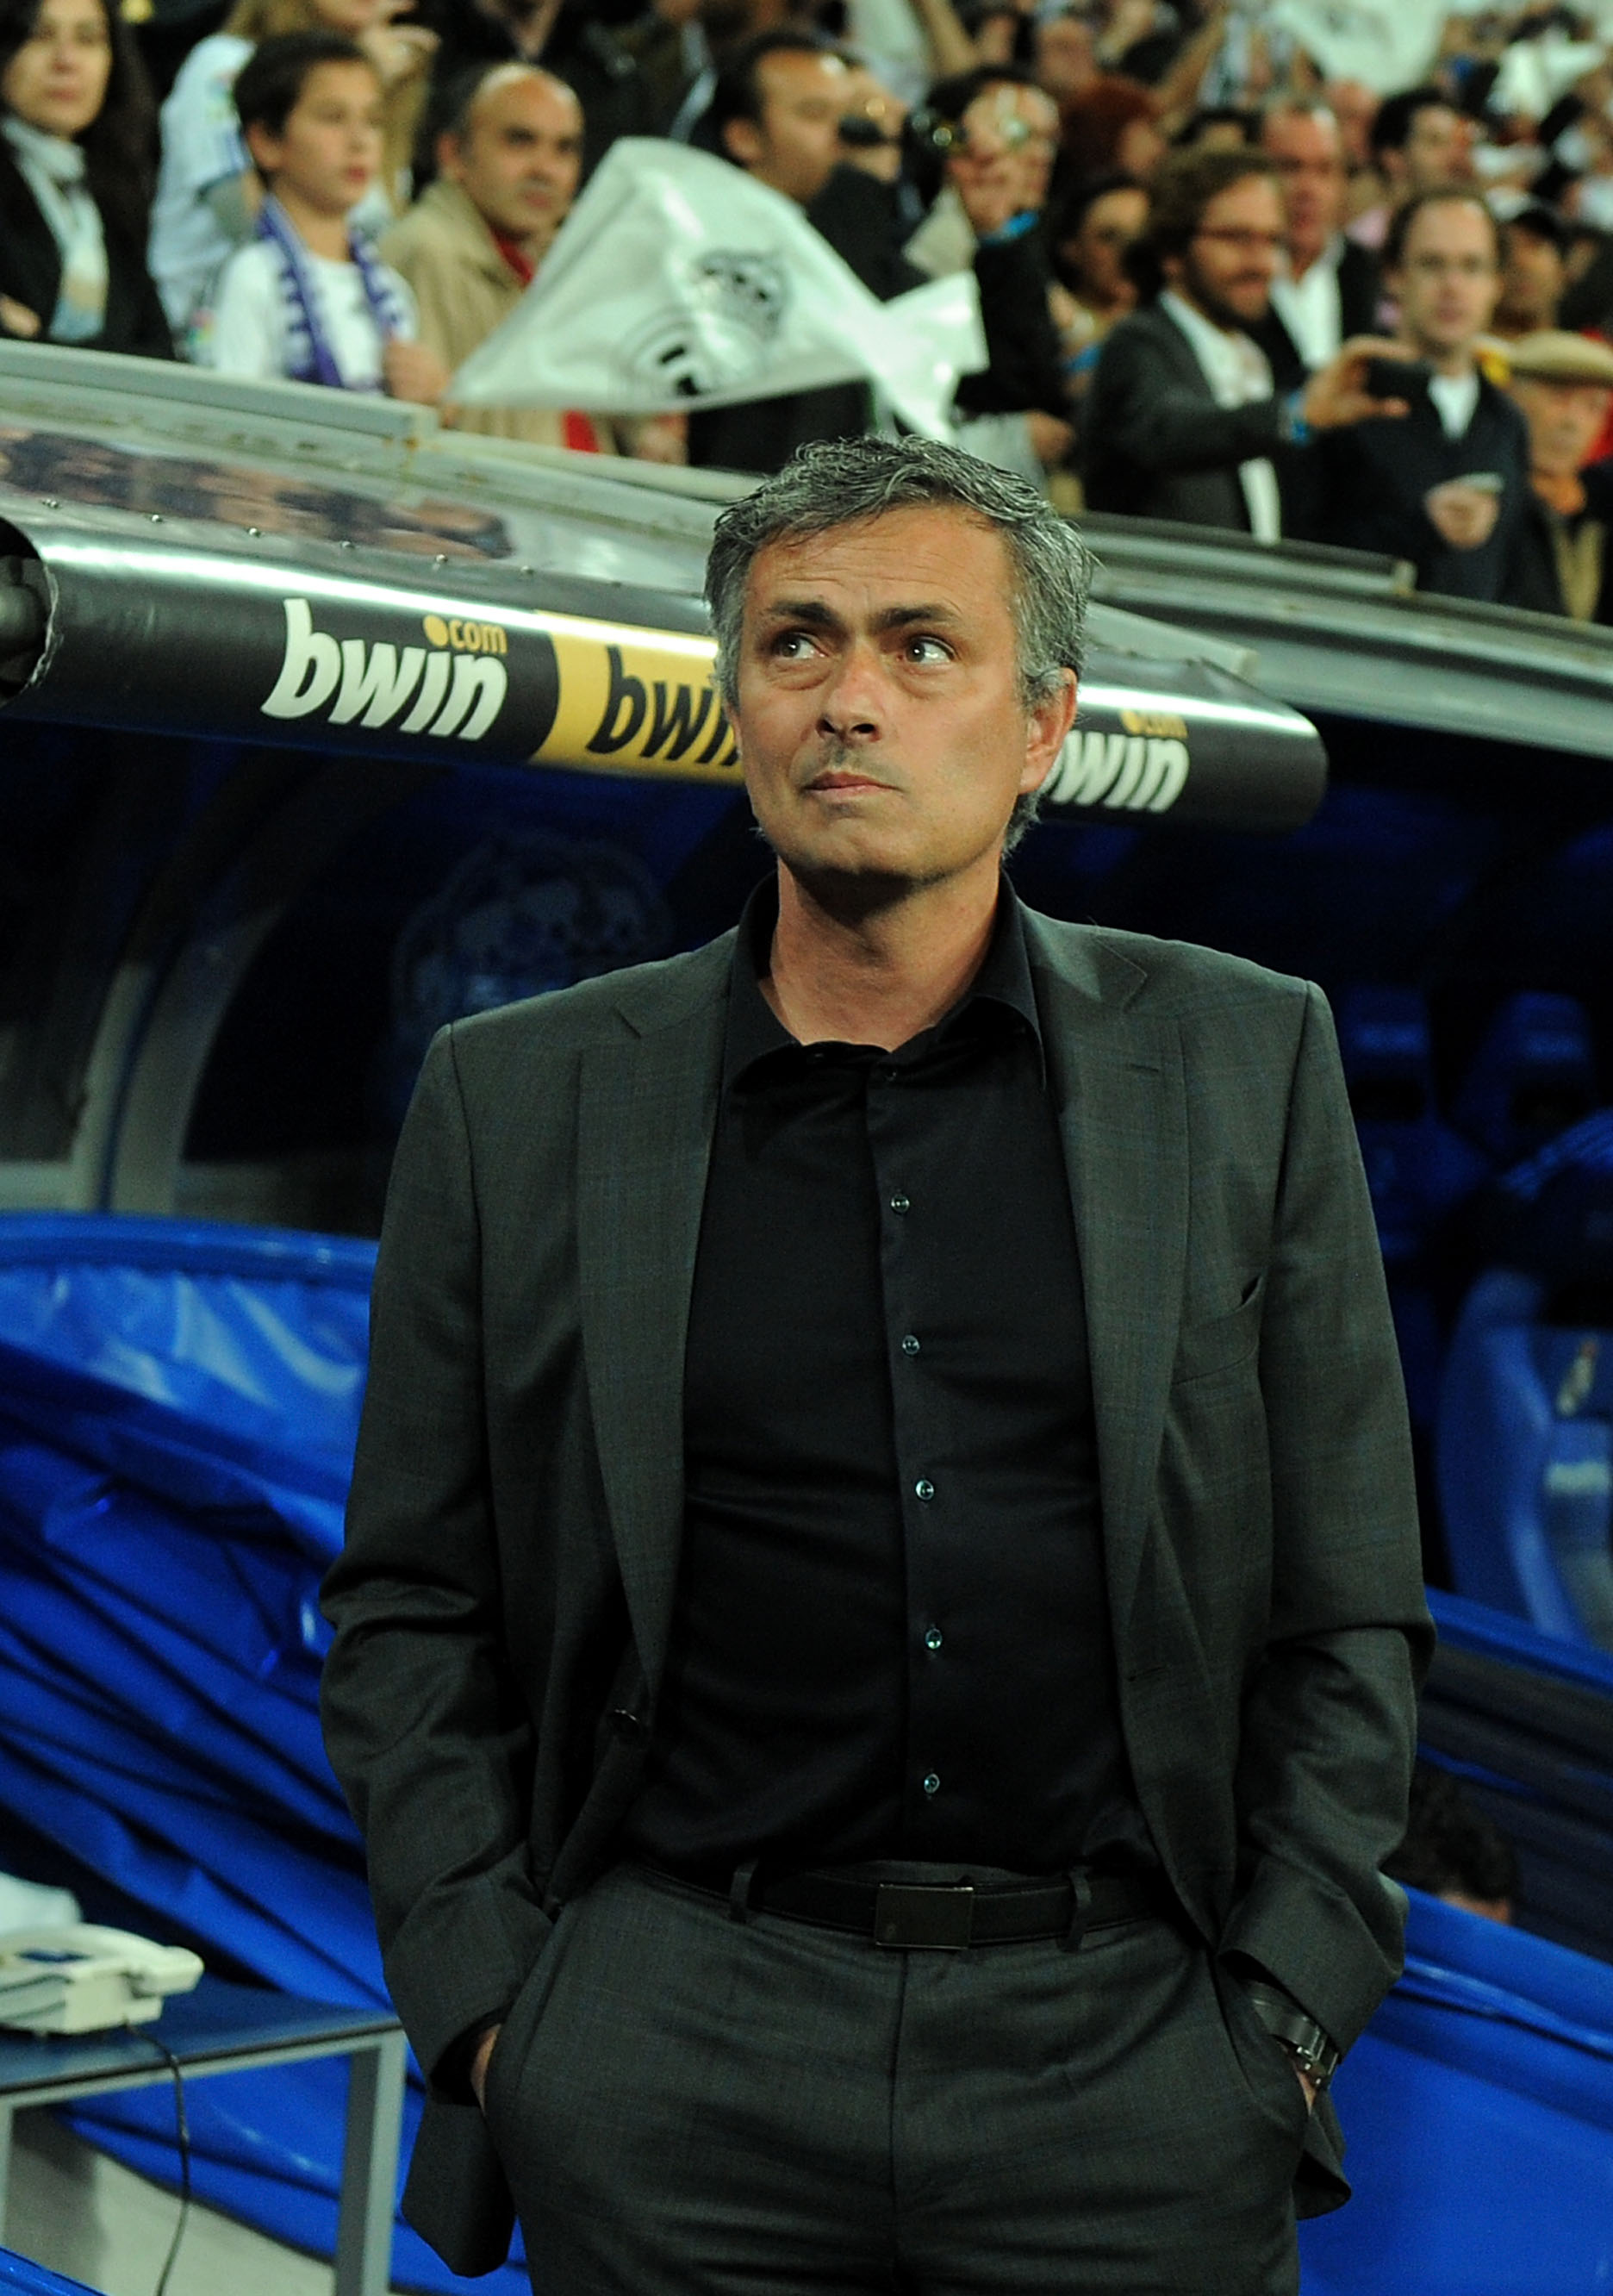 MADRID, SPAIN - APRIL 16: Head coach Jose Mourinho of Real Madrid waits for the start of the La Liga match between Real Madrid and Barcelona at Estadio Santiago Bernabeu on April 16, 2011 in Madrid, Spain.  (Photo by Denis Doyle/Getty Images)